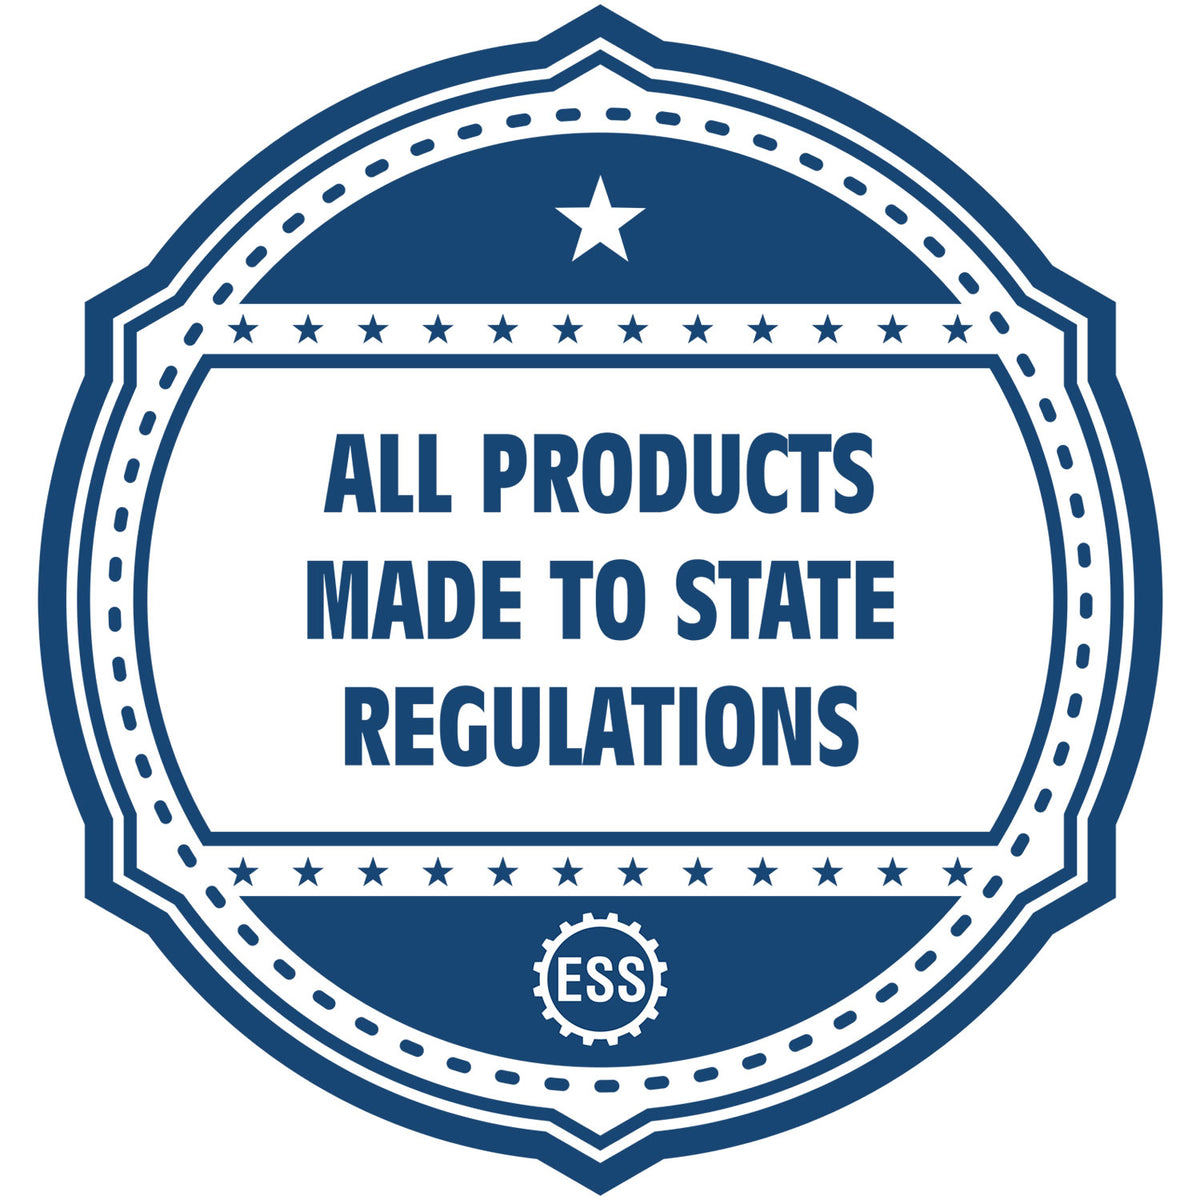 An icon or badge element for the State of Kentucky Soft Land Surveyor Embossing Seal showing that this product is made in compliance with state regulations.